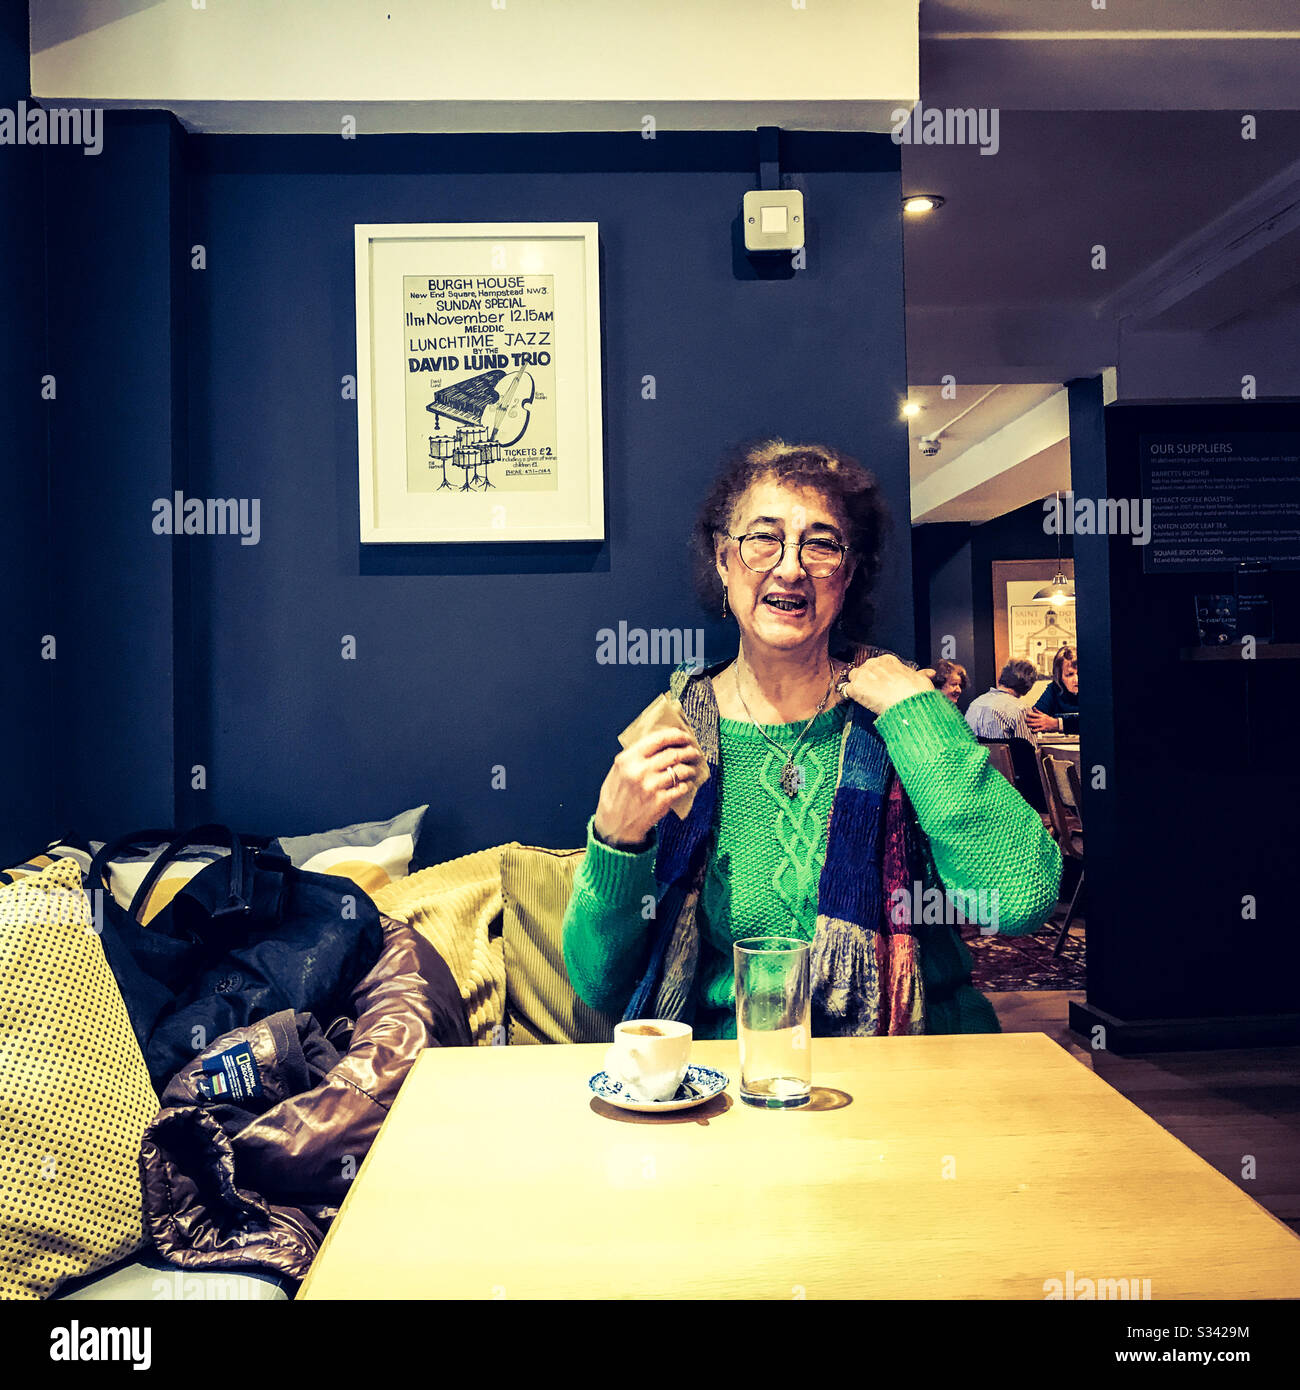 A woman smiling in a good mood enjoying a coffee and drink at a cafe table portrait Stock Photo